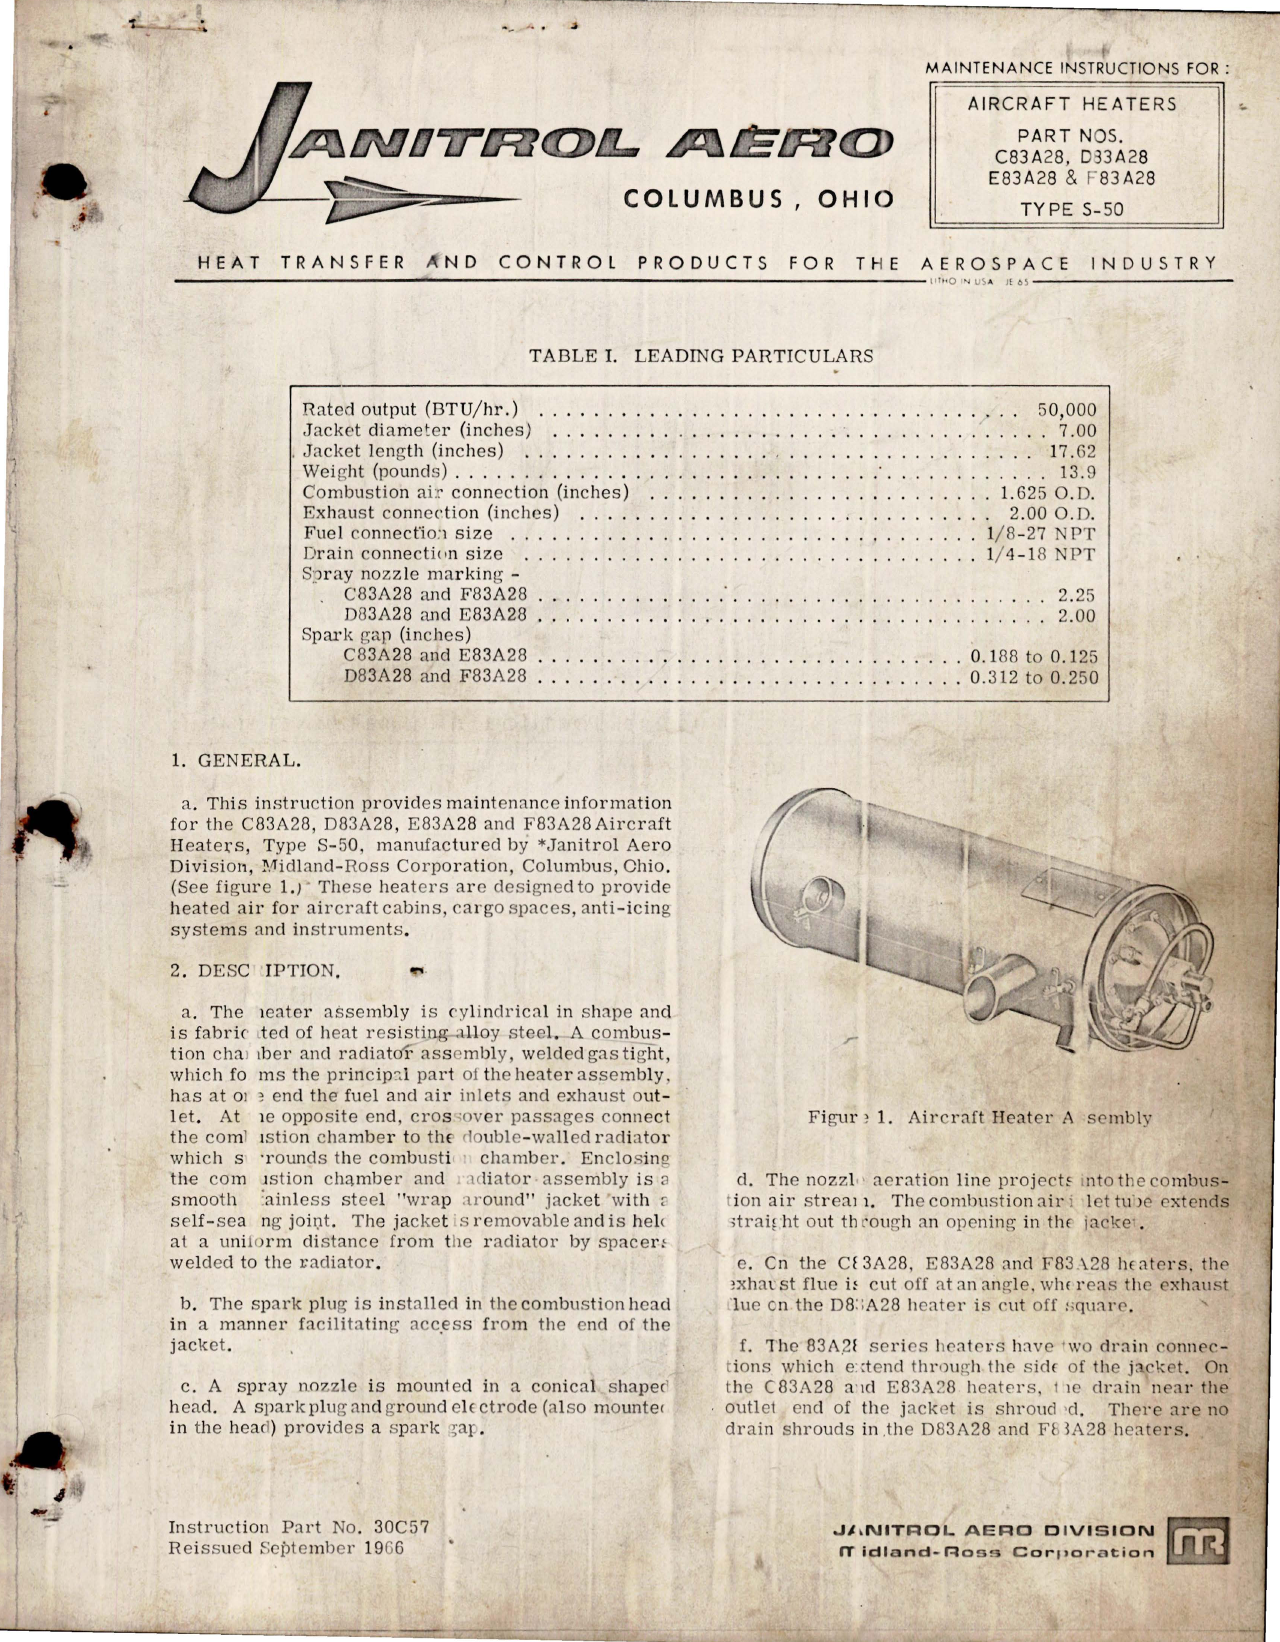 Sample page 1 from AirCorps Library document: Maintenance Instructions for Aircraft Heaters - Parts C83A28, D83A28, E83A28 and F83A28 - Type S-50